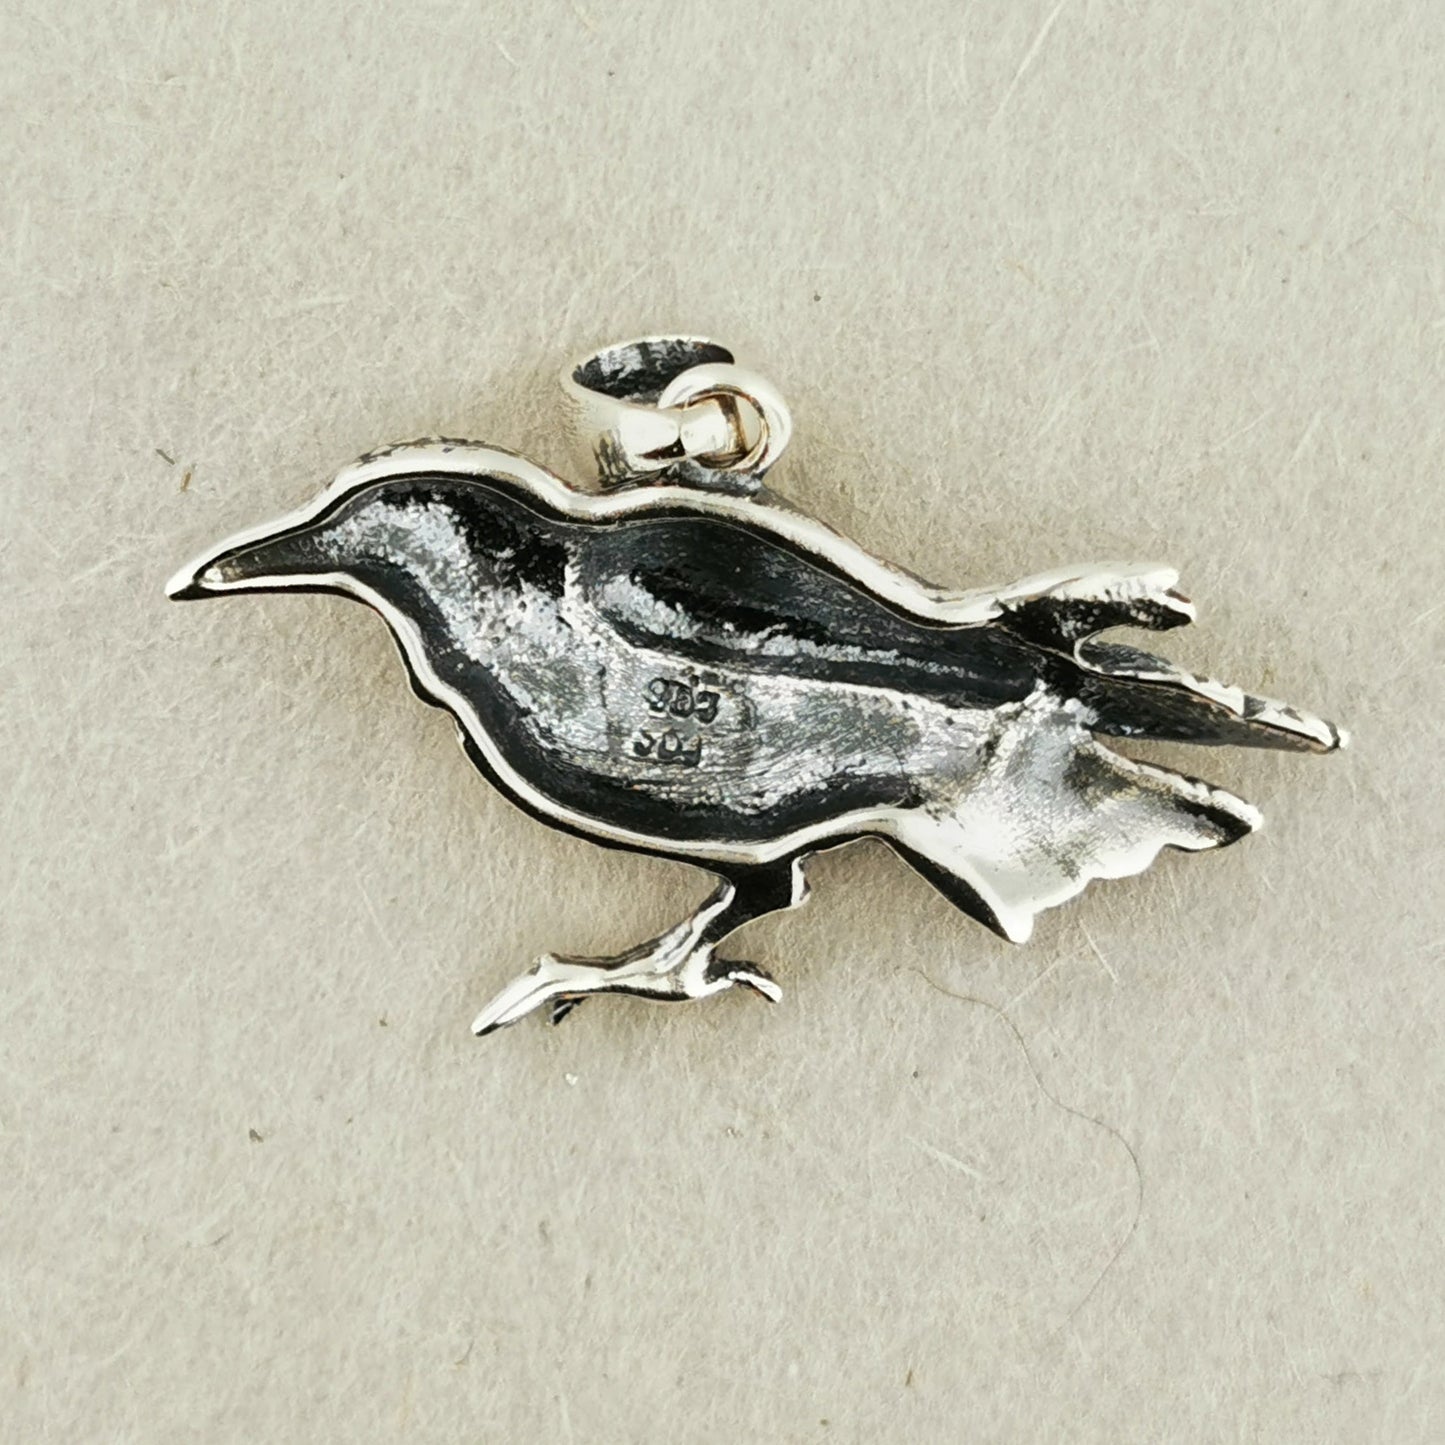 Raven Charm Pendant in 925 Silver or Bronze, Oden Raven Pendant, Mens Raven Jewelry, Raven Jewellery Gift for Him, Crow Necklace Charm, Silver Crow Pendant, Silver Raven Pendant, Silver Raven Jewellery, Silver Crow Jewelry, Silver Viking Pendant